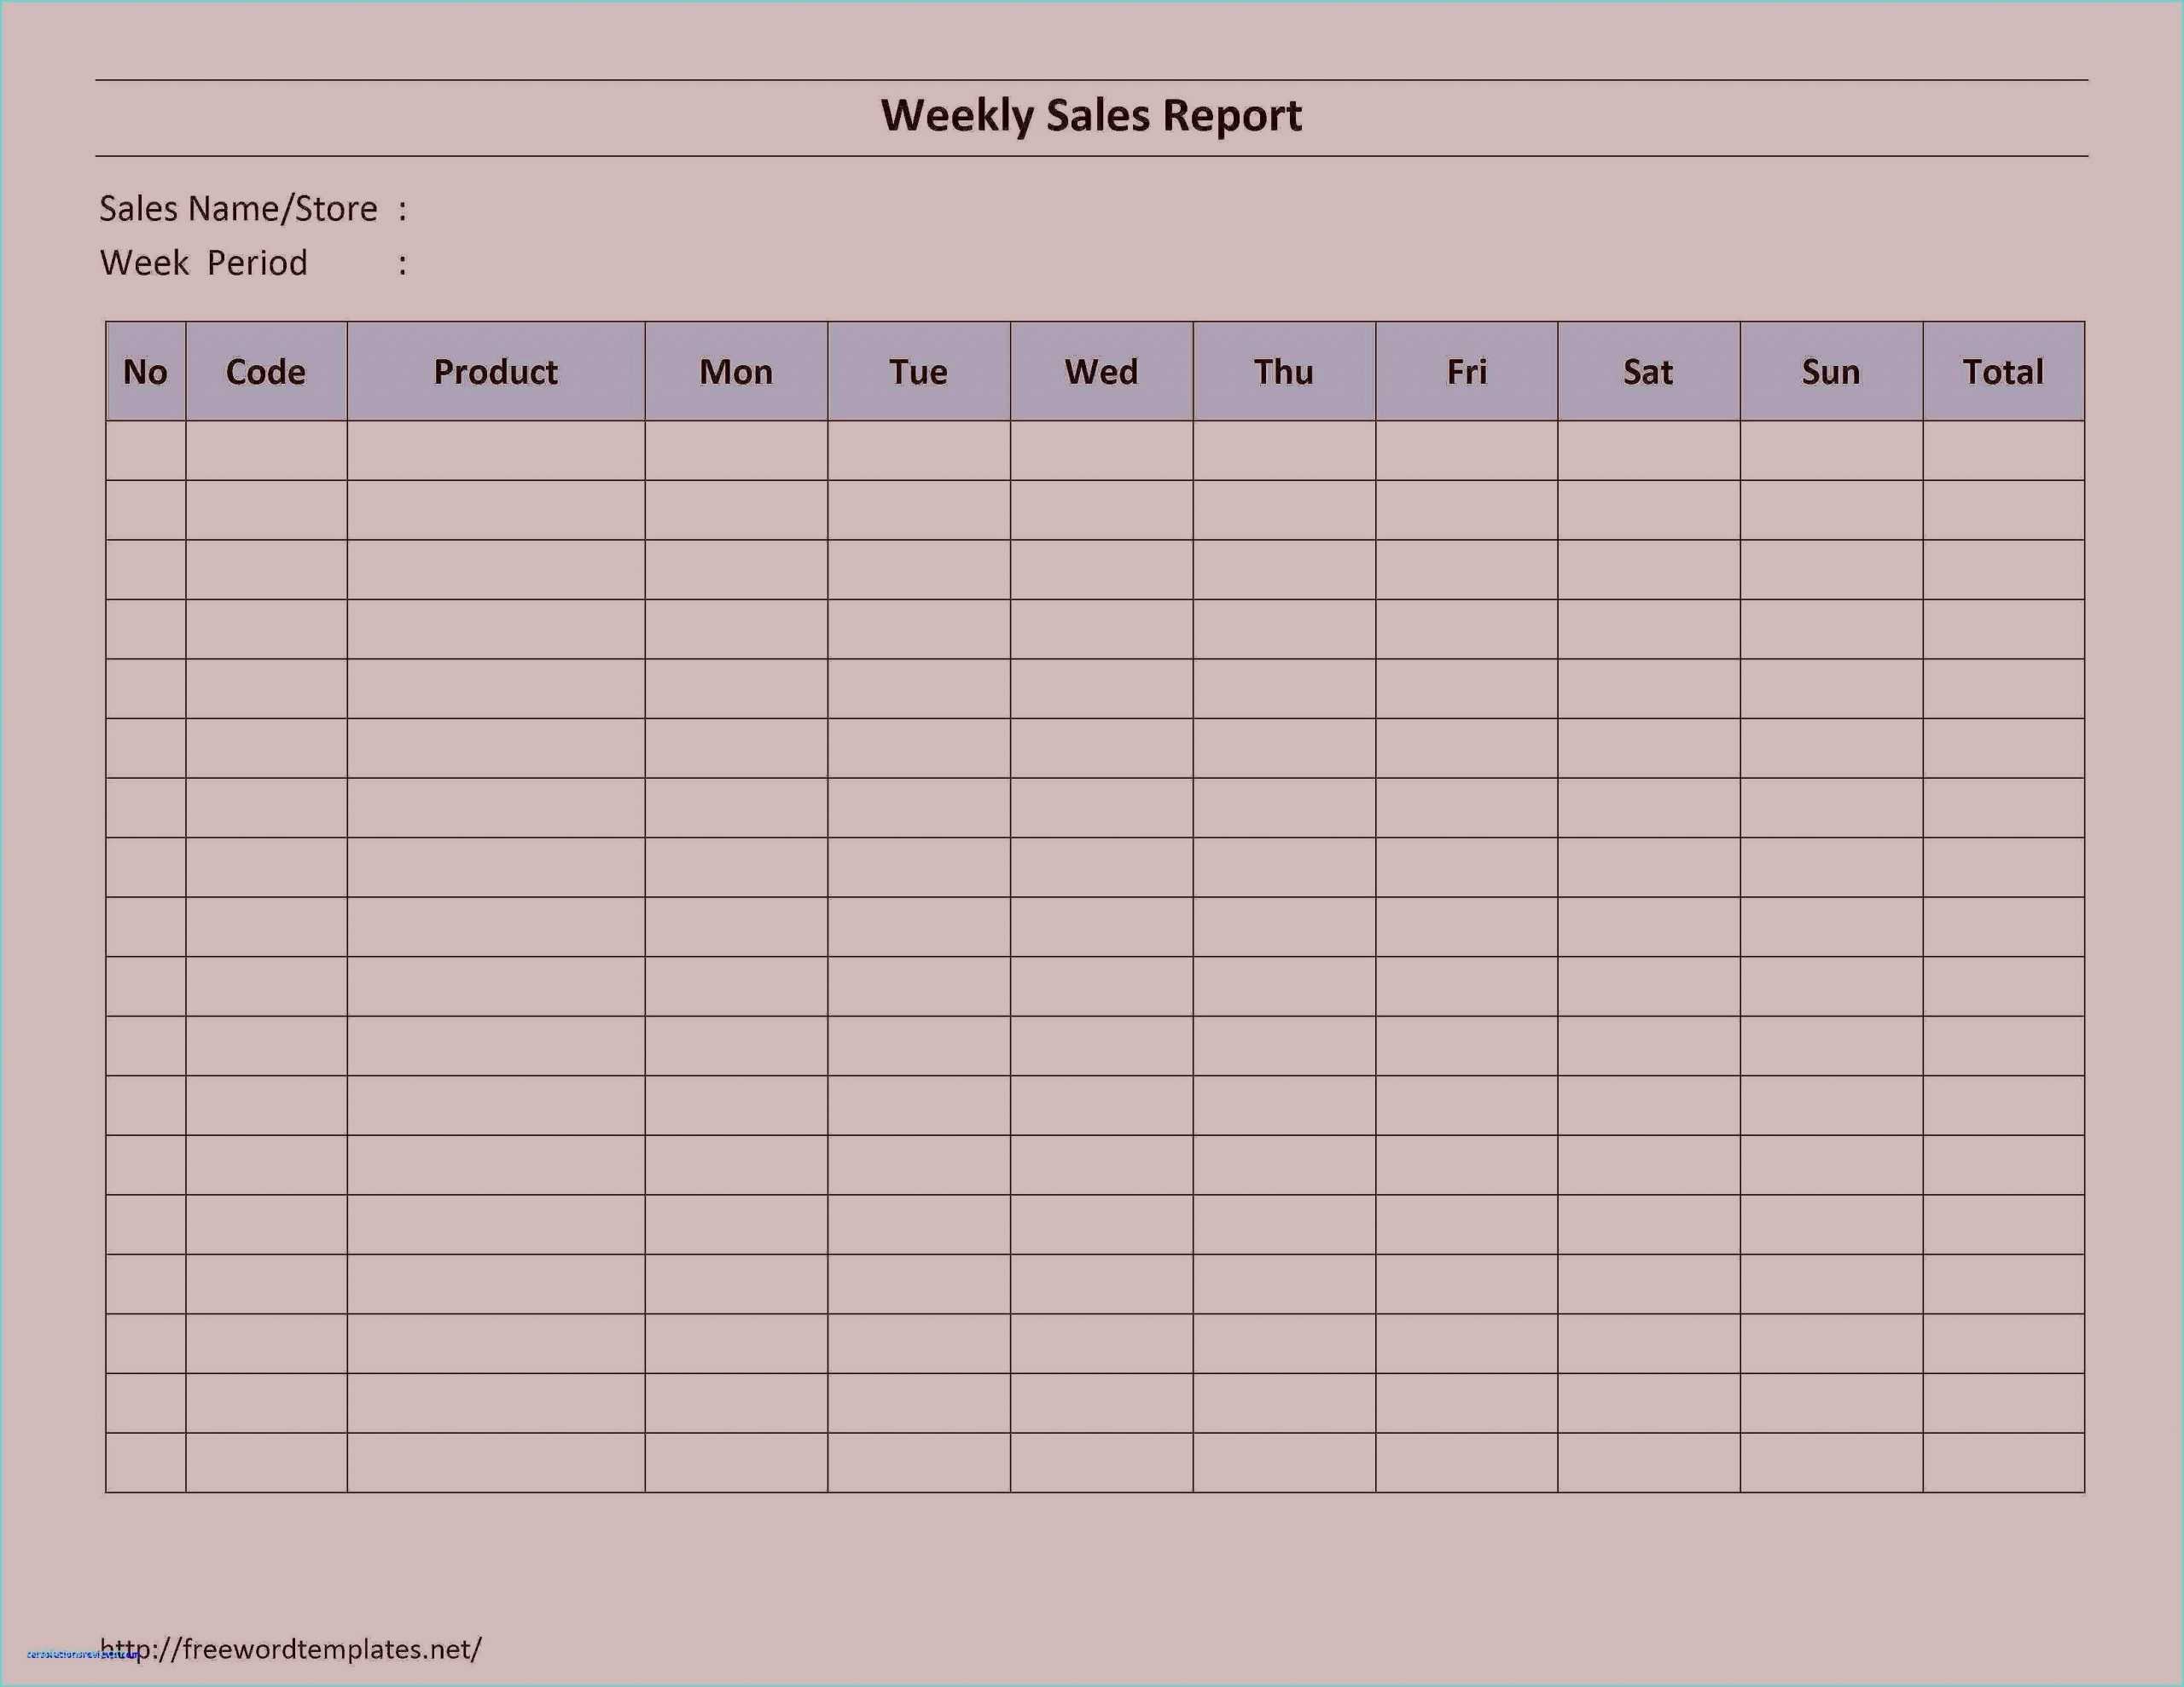 Spreadsheet Report And Weekly Sales Template Activity Throughout Sales Activity Report Template Excel